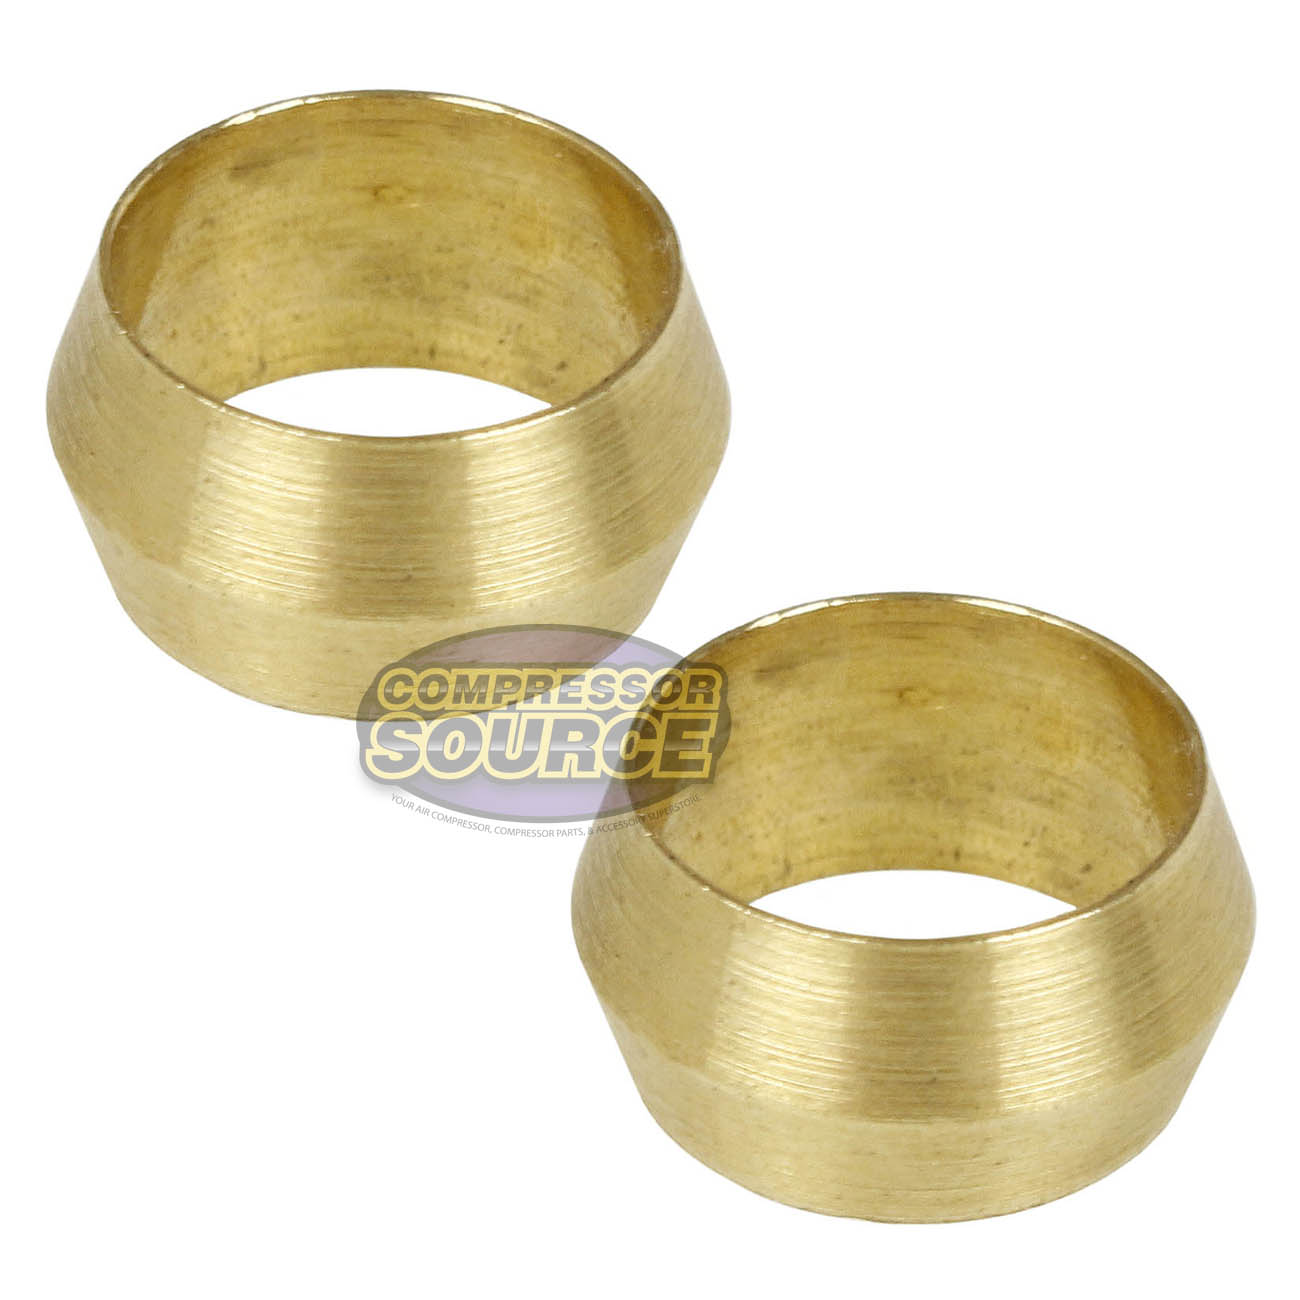 2 Pack 3/8" Compression Sleeve Solid Brass Ferrule for 3/8" Compression Tubing